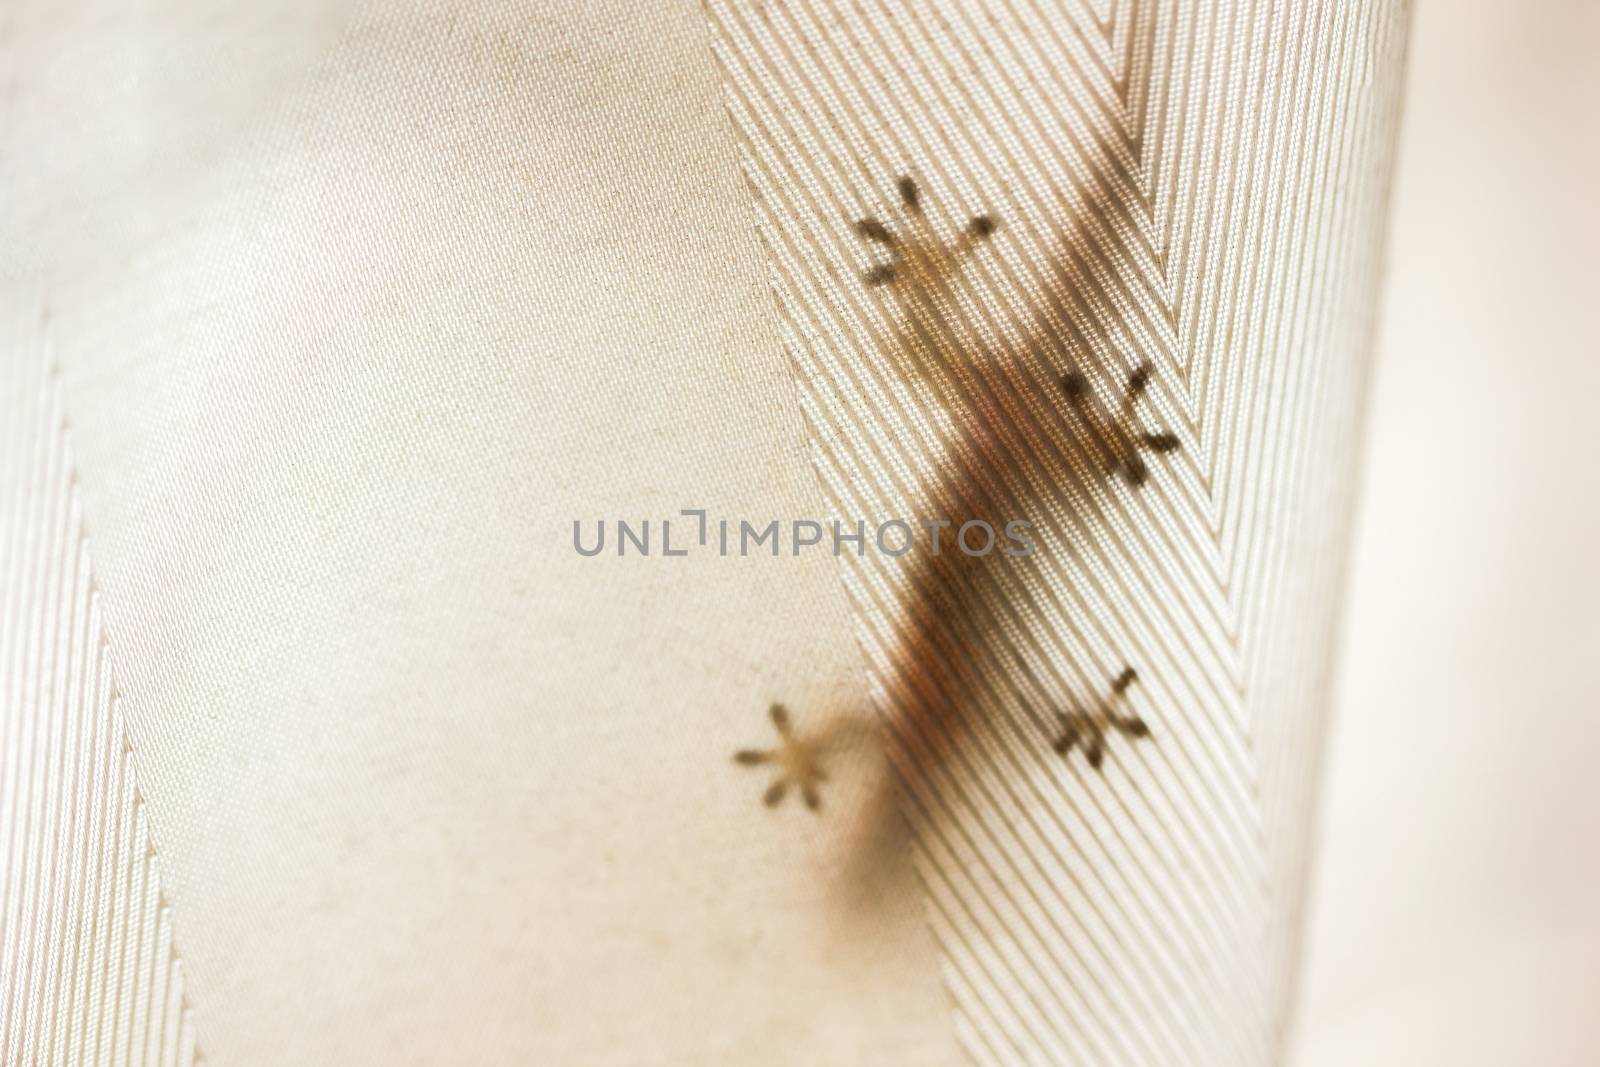 Home lizards hiding behind curtains. Find insects for food. Copy by SaitanSainam